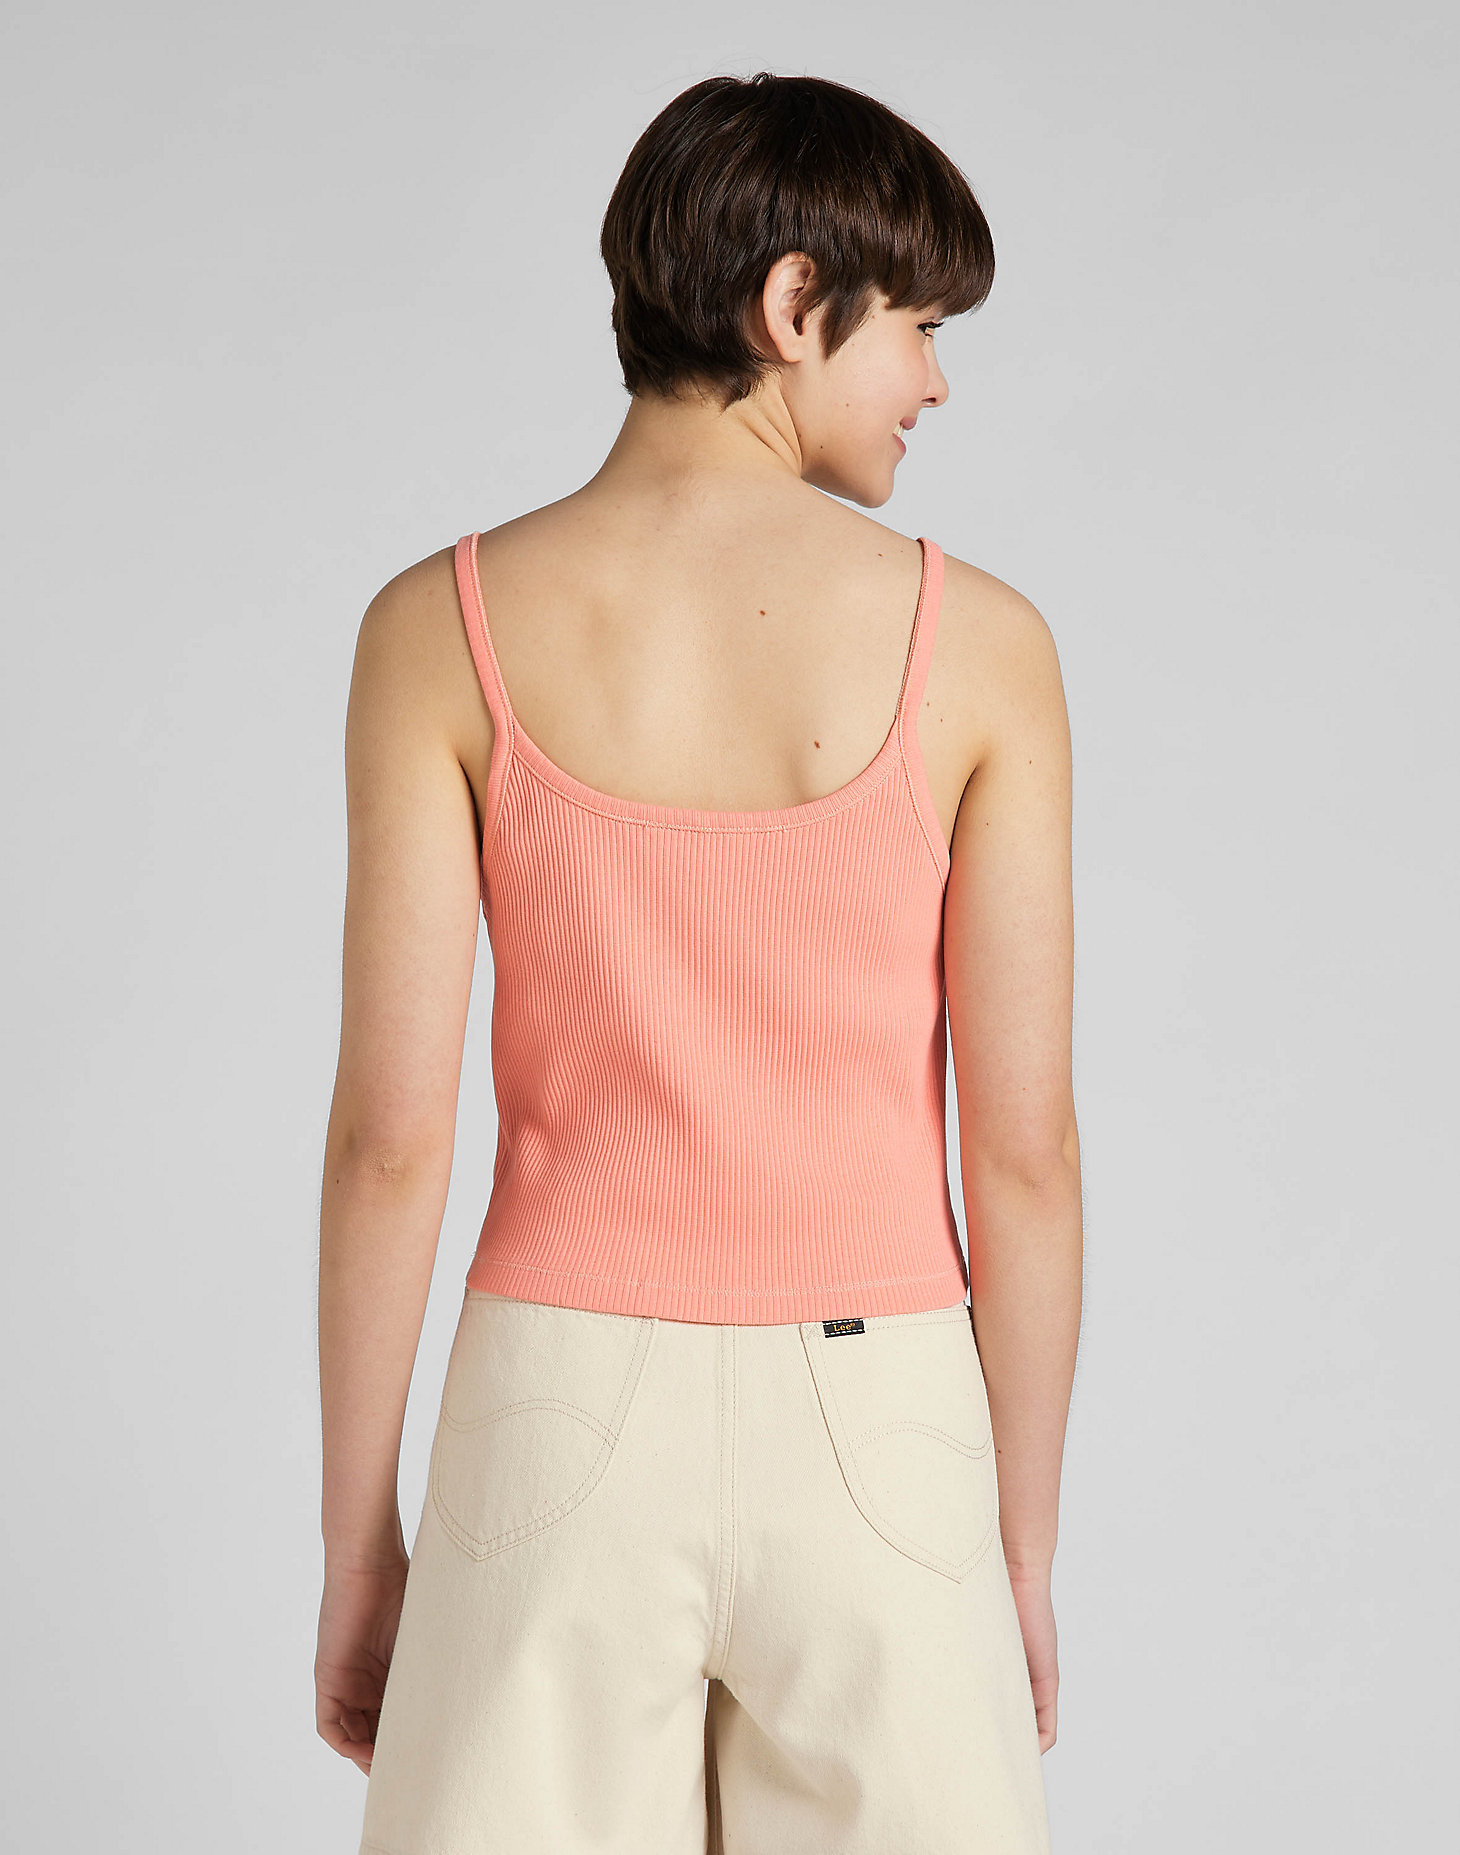 Summer Tank in Bright Coral alternative view 1